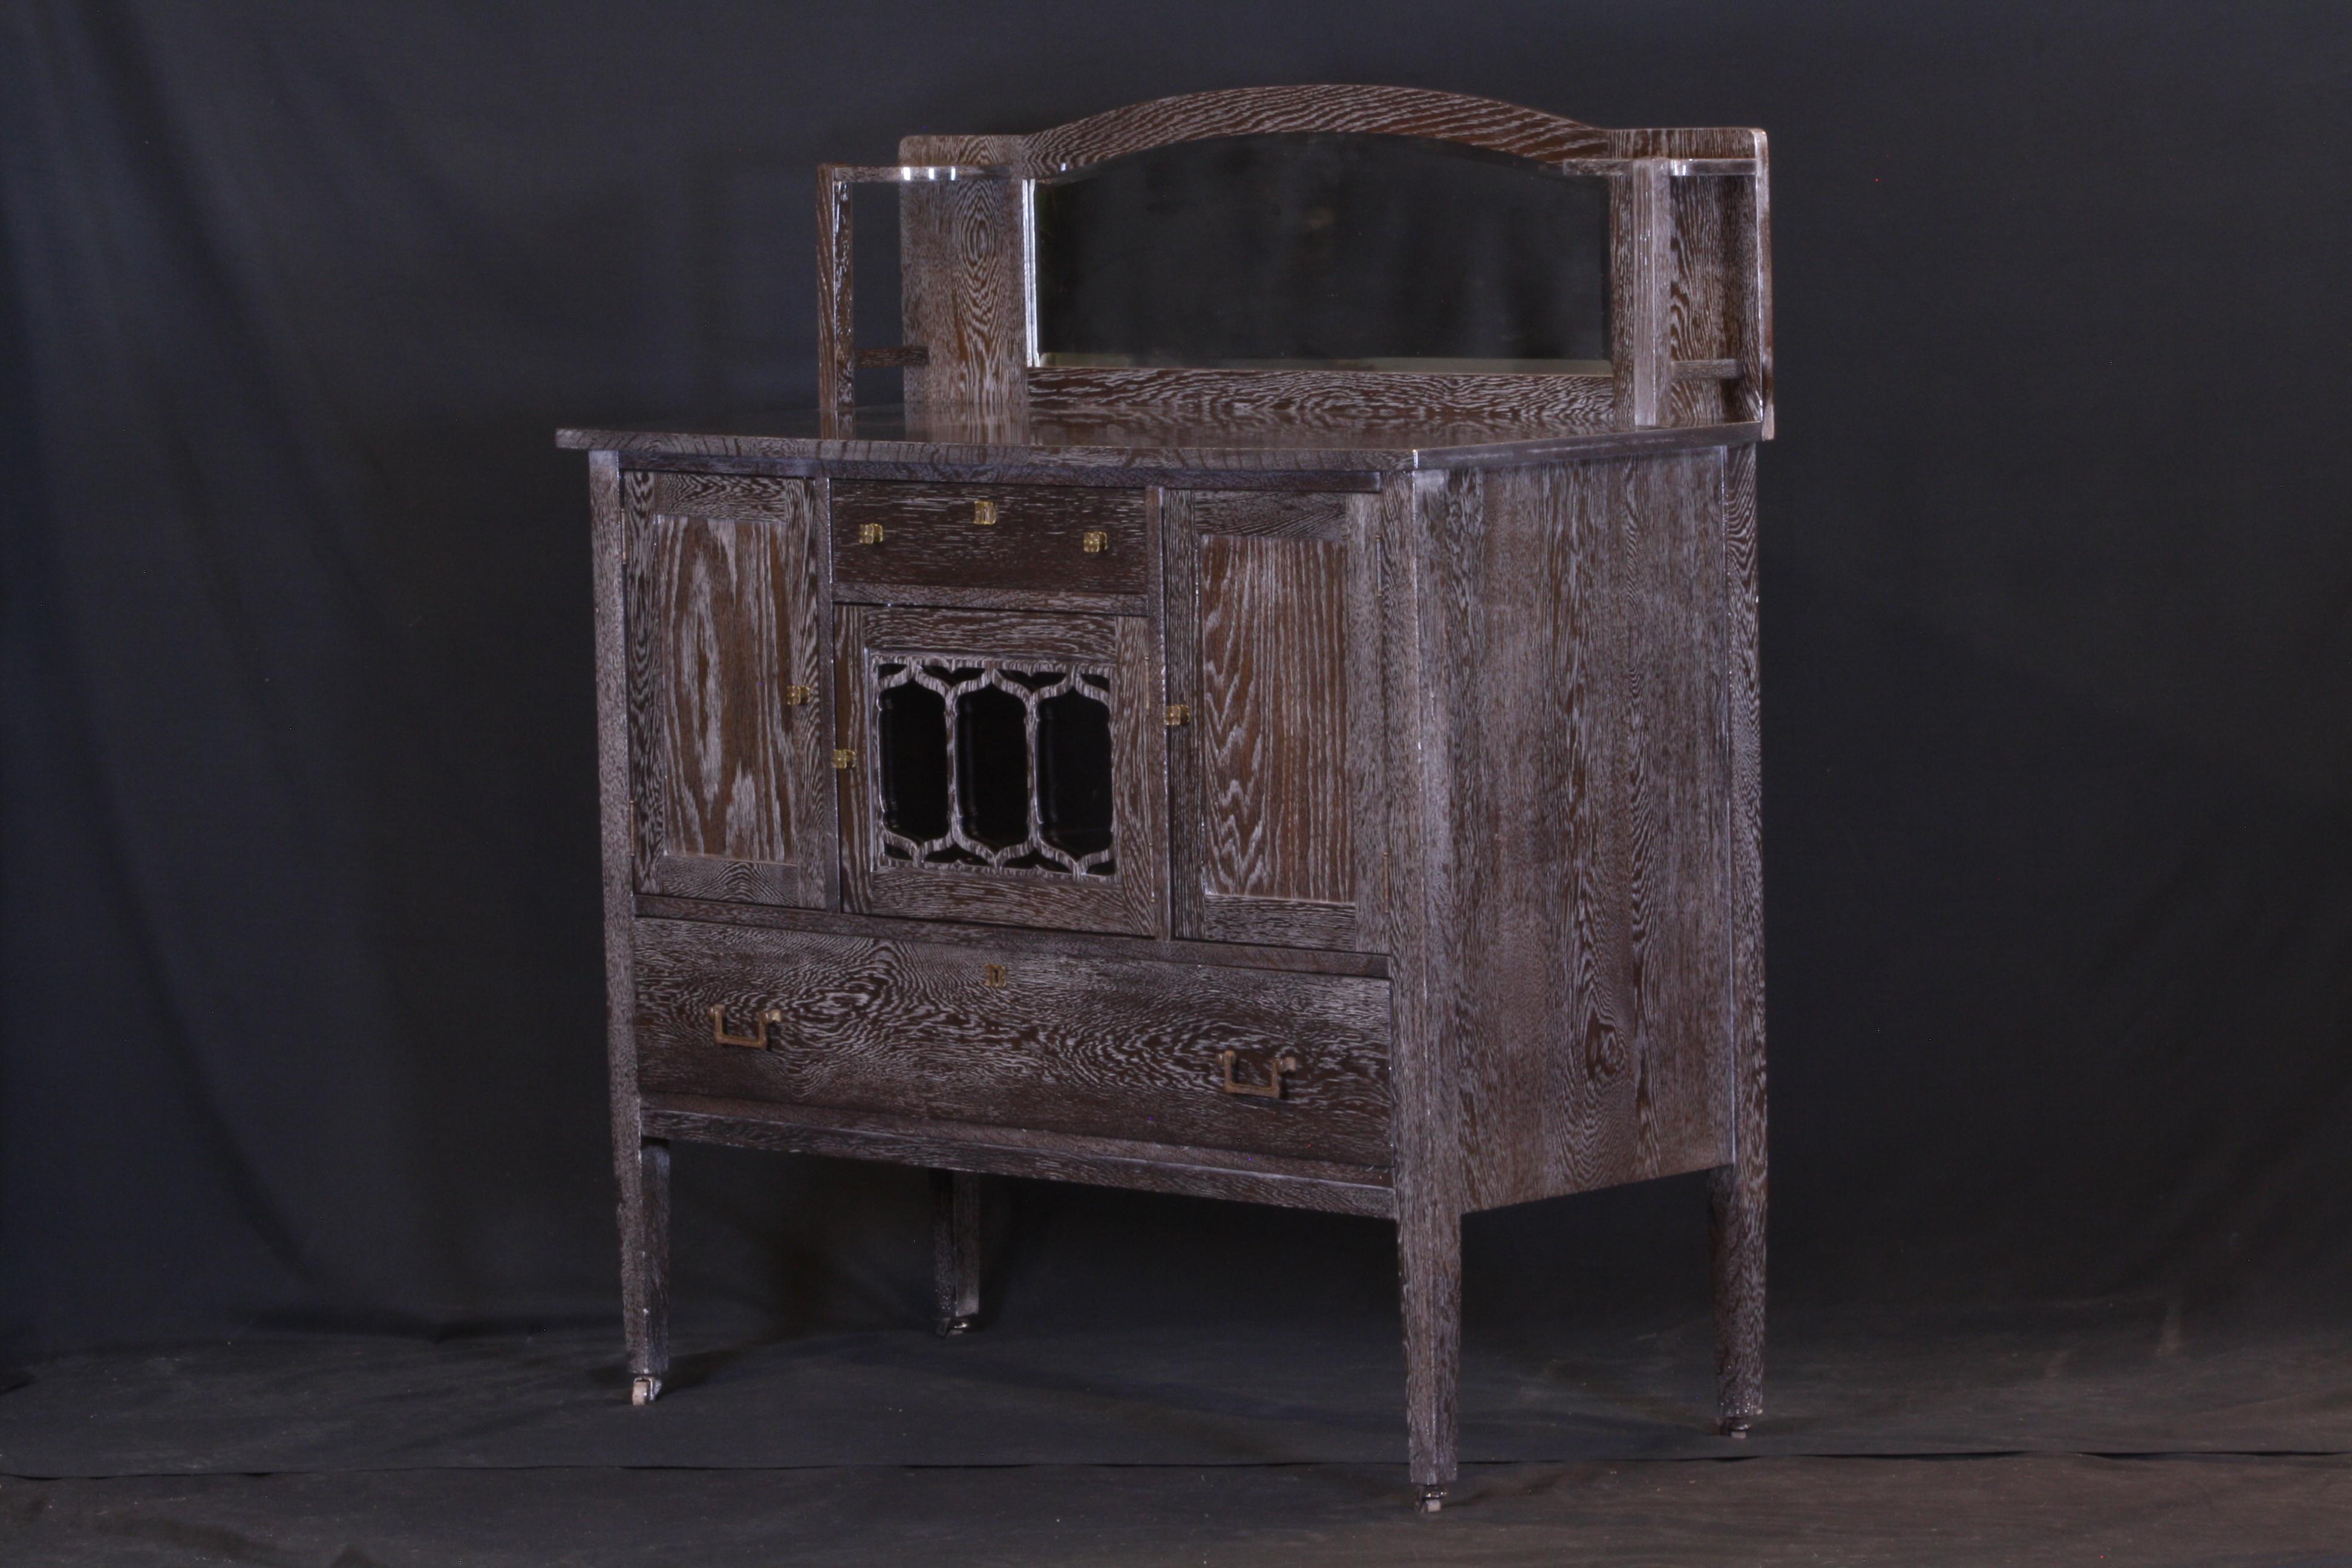 An early 20th century oak sideboard with bevel glass mirror, refinished in a slate grey satin with a gloss lacquer.